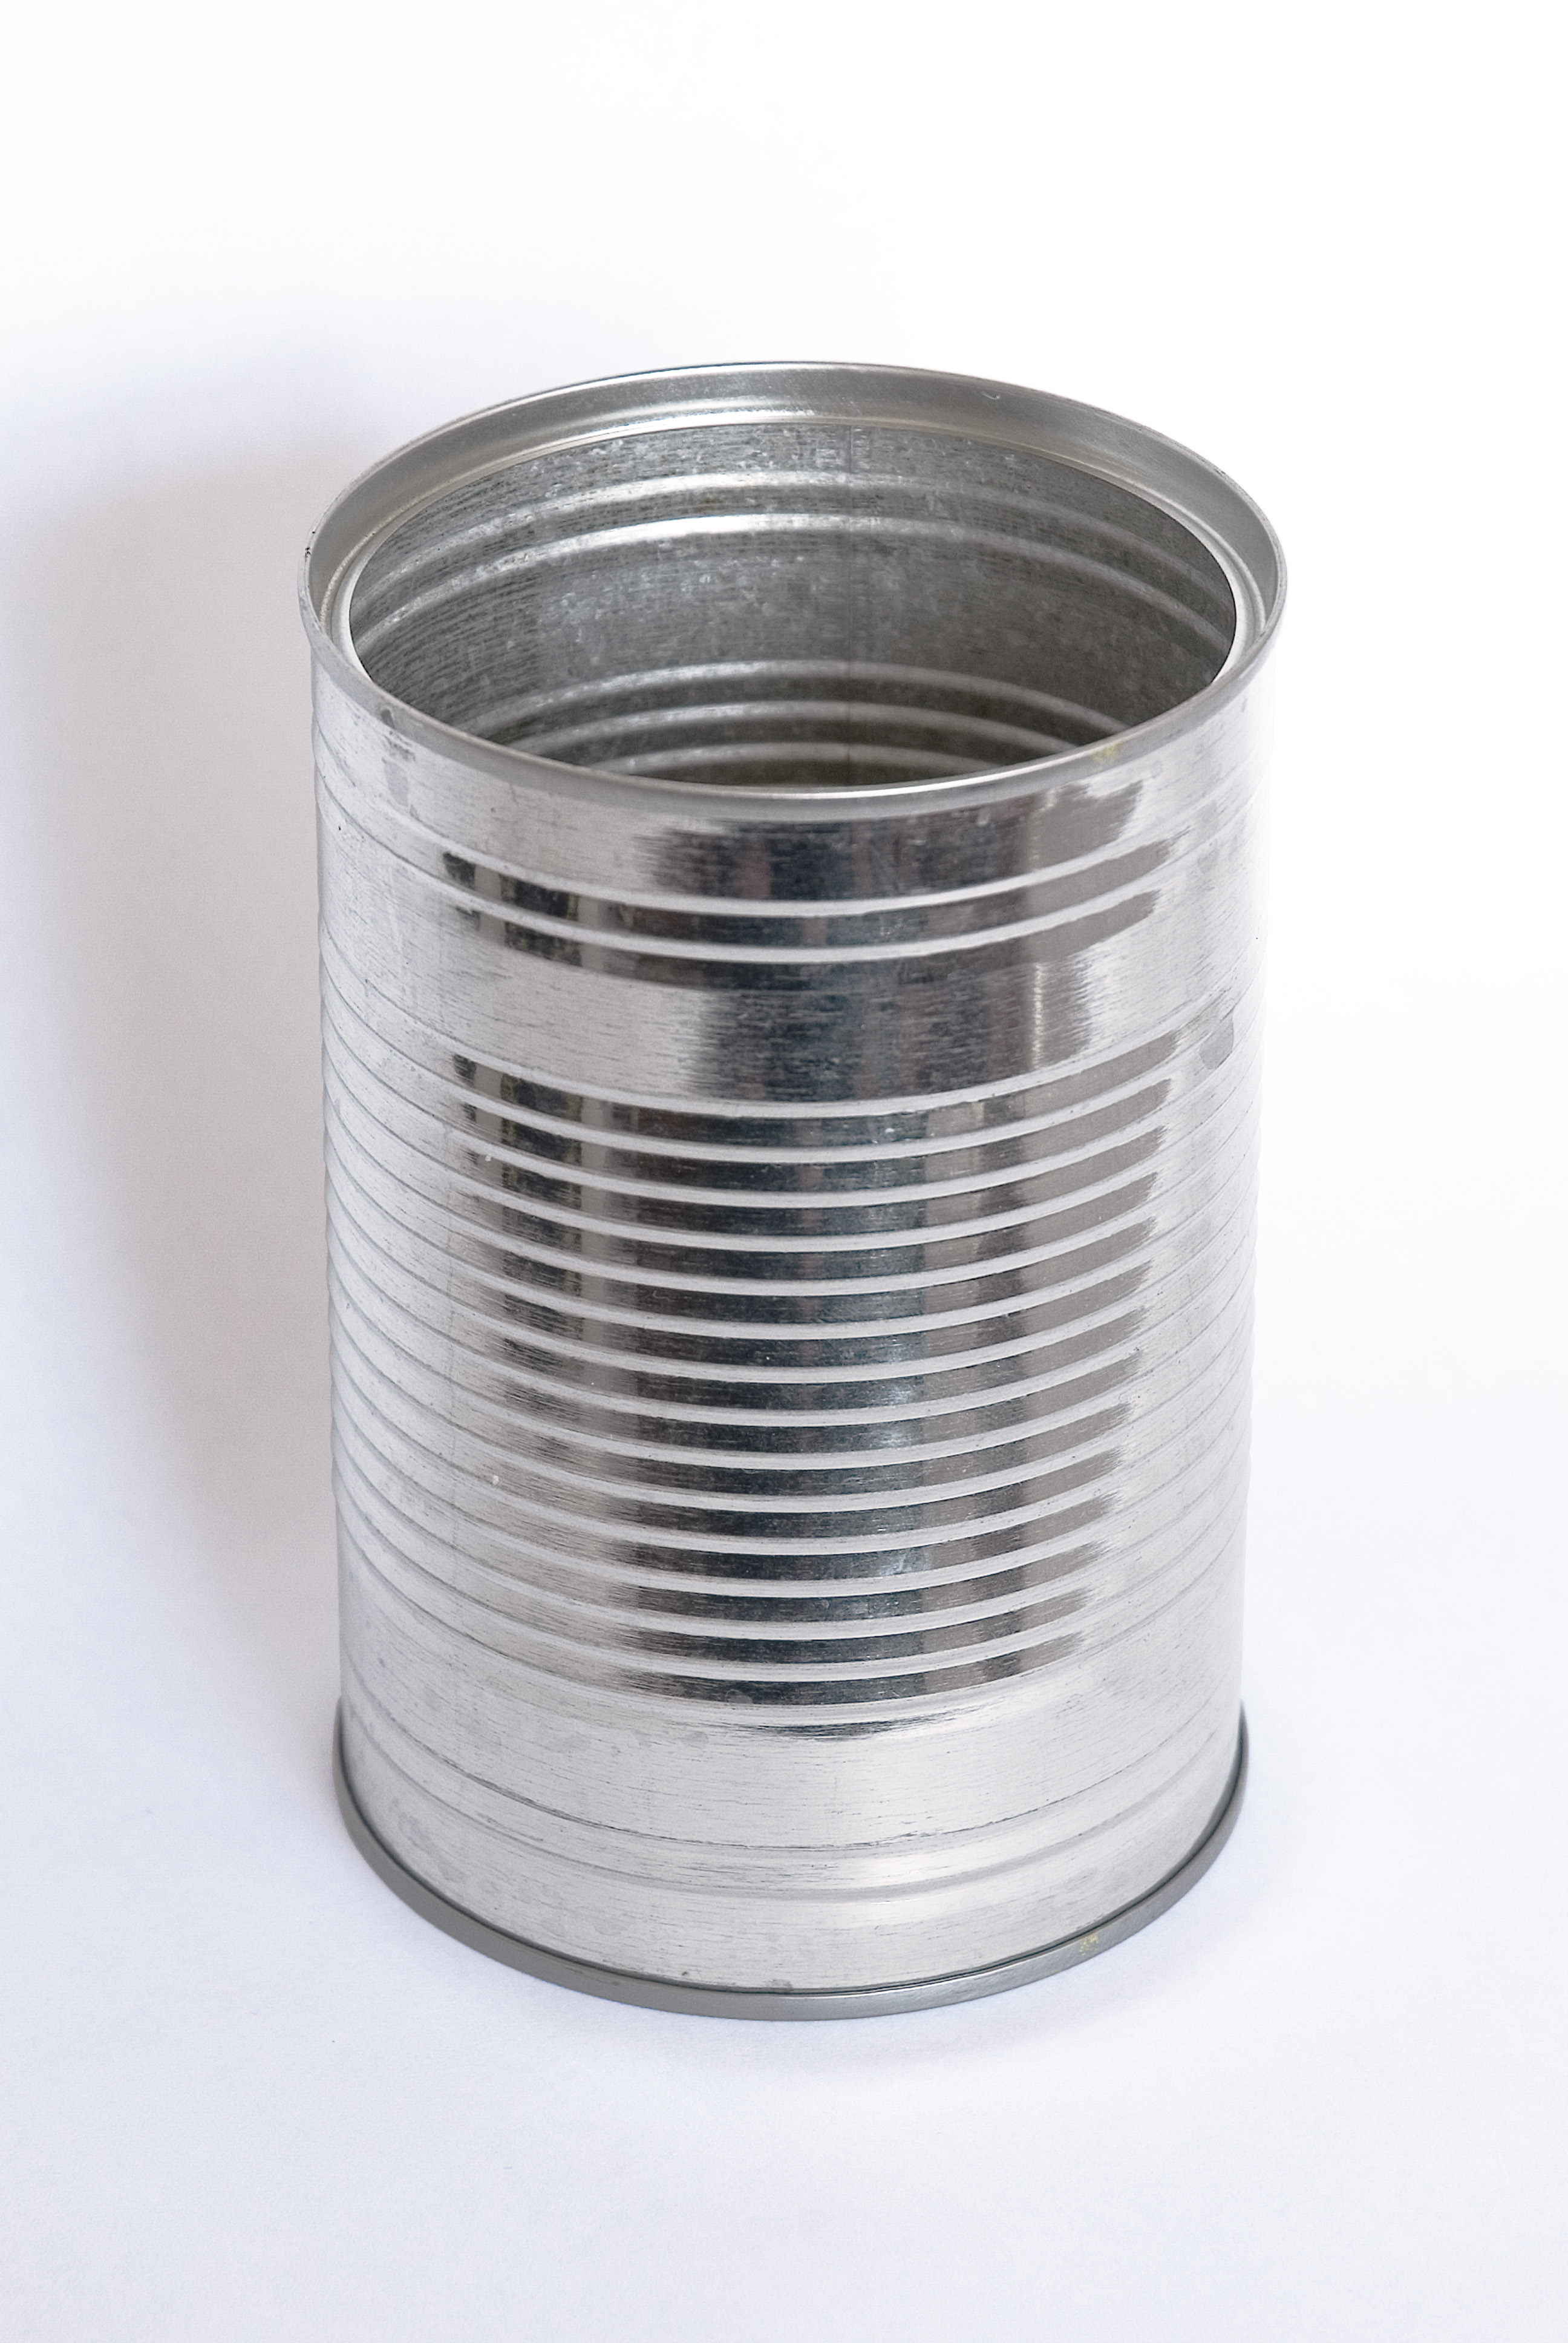 File:Empty tin can2009-01-19.jpg - Wikimedia Commons